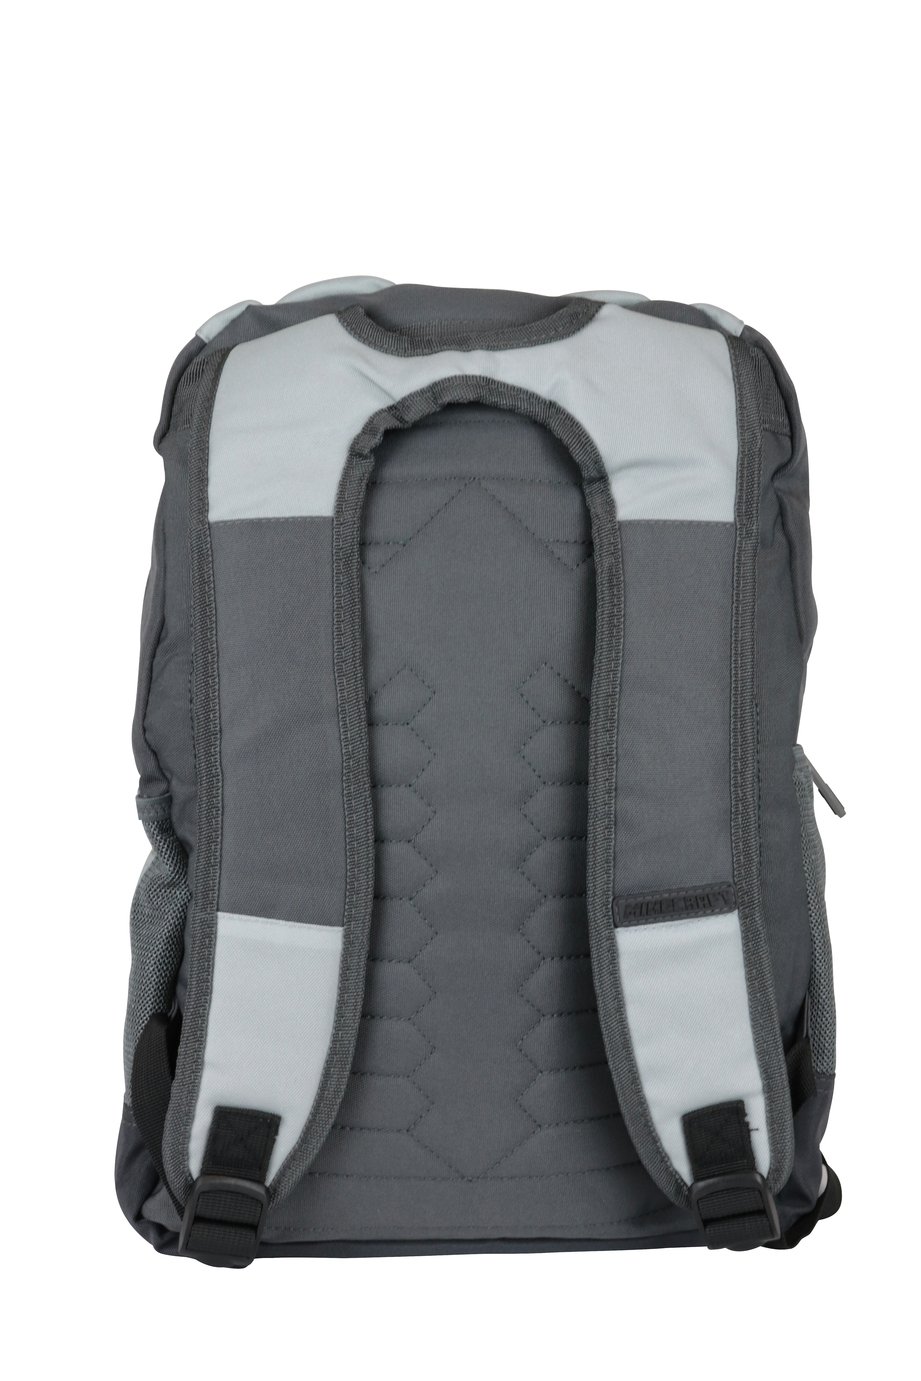 Minecraft Block Backpack Grey Review